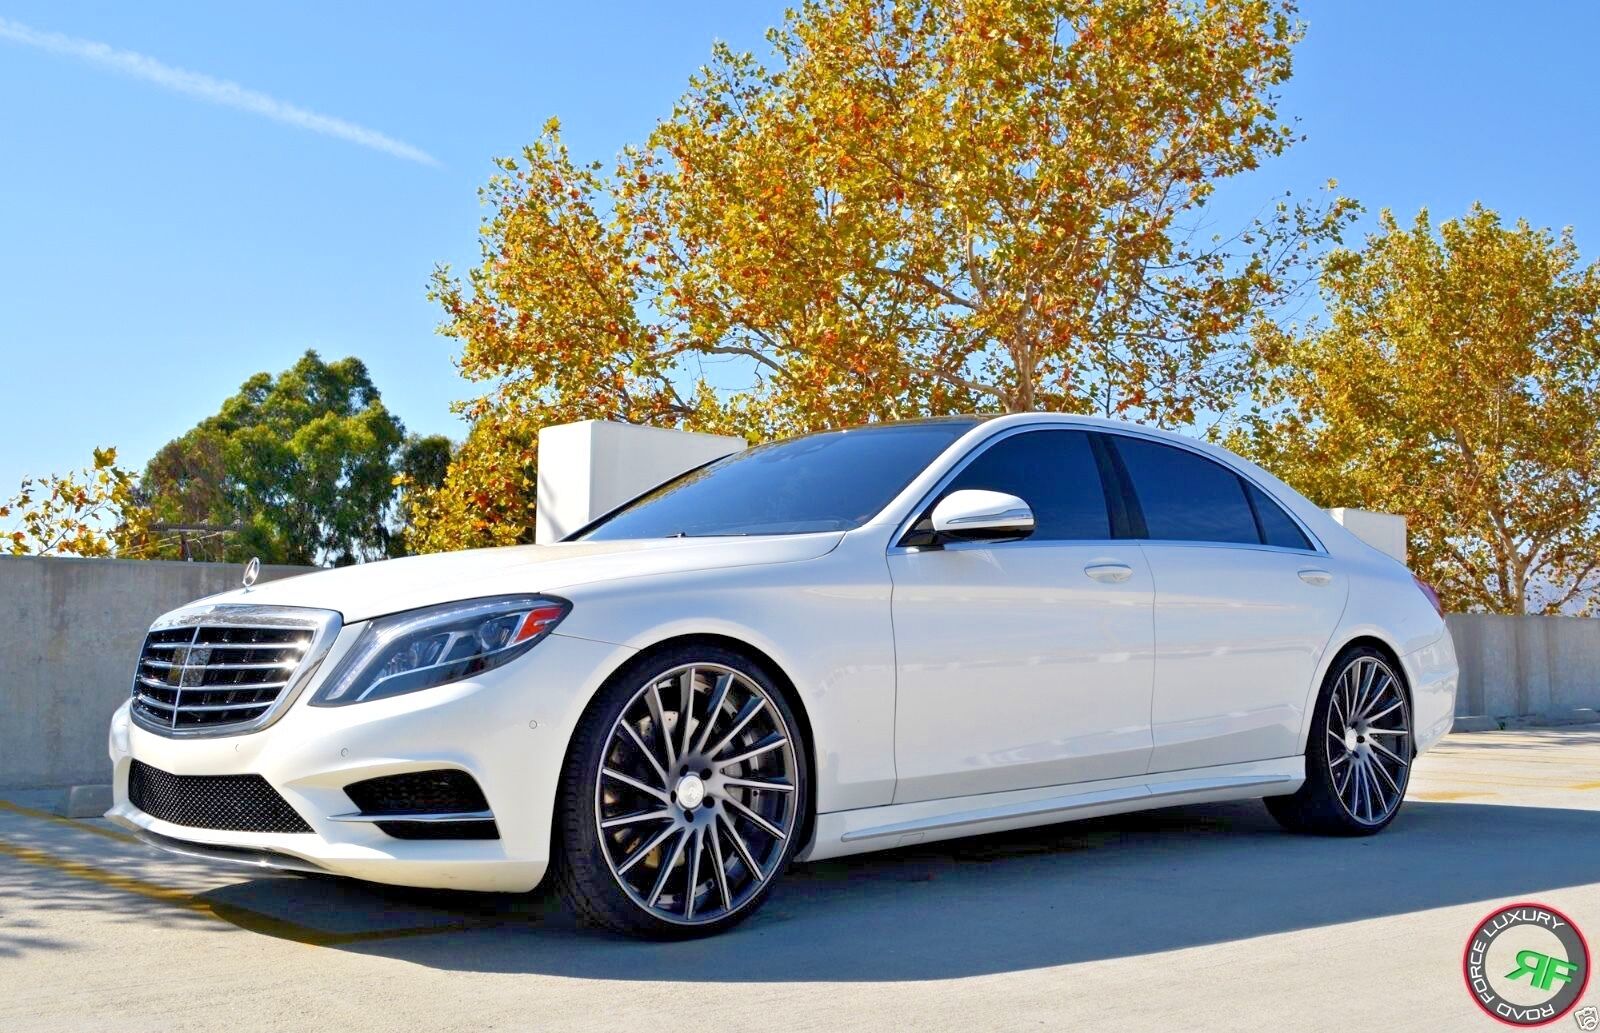 22” RF16 STAGGERED WHEELS RIMS FOR MERCEDES S CLASS W222 S550 2014 -PRESENT